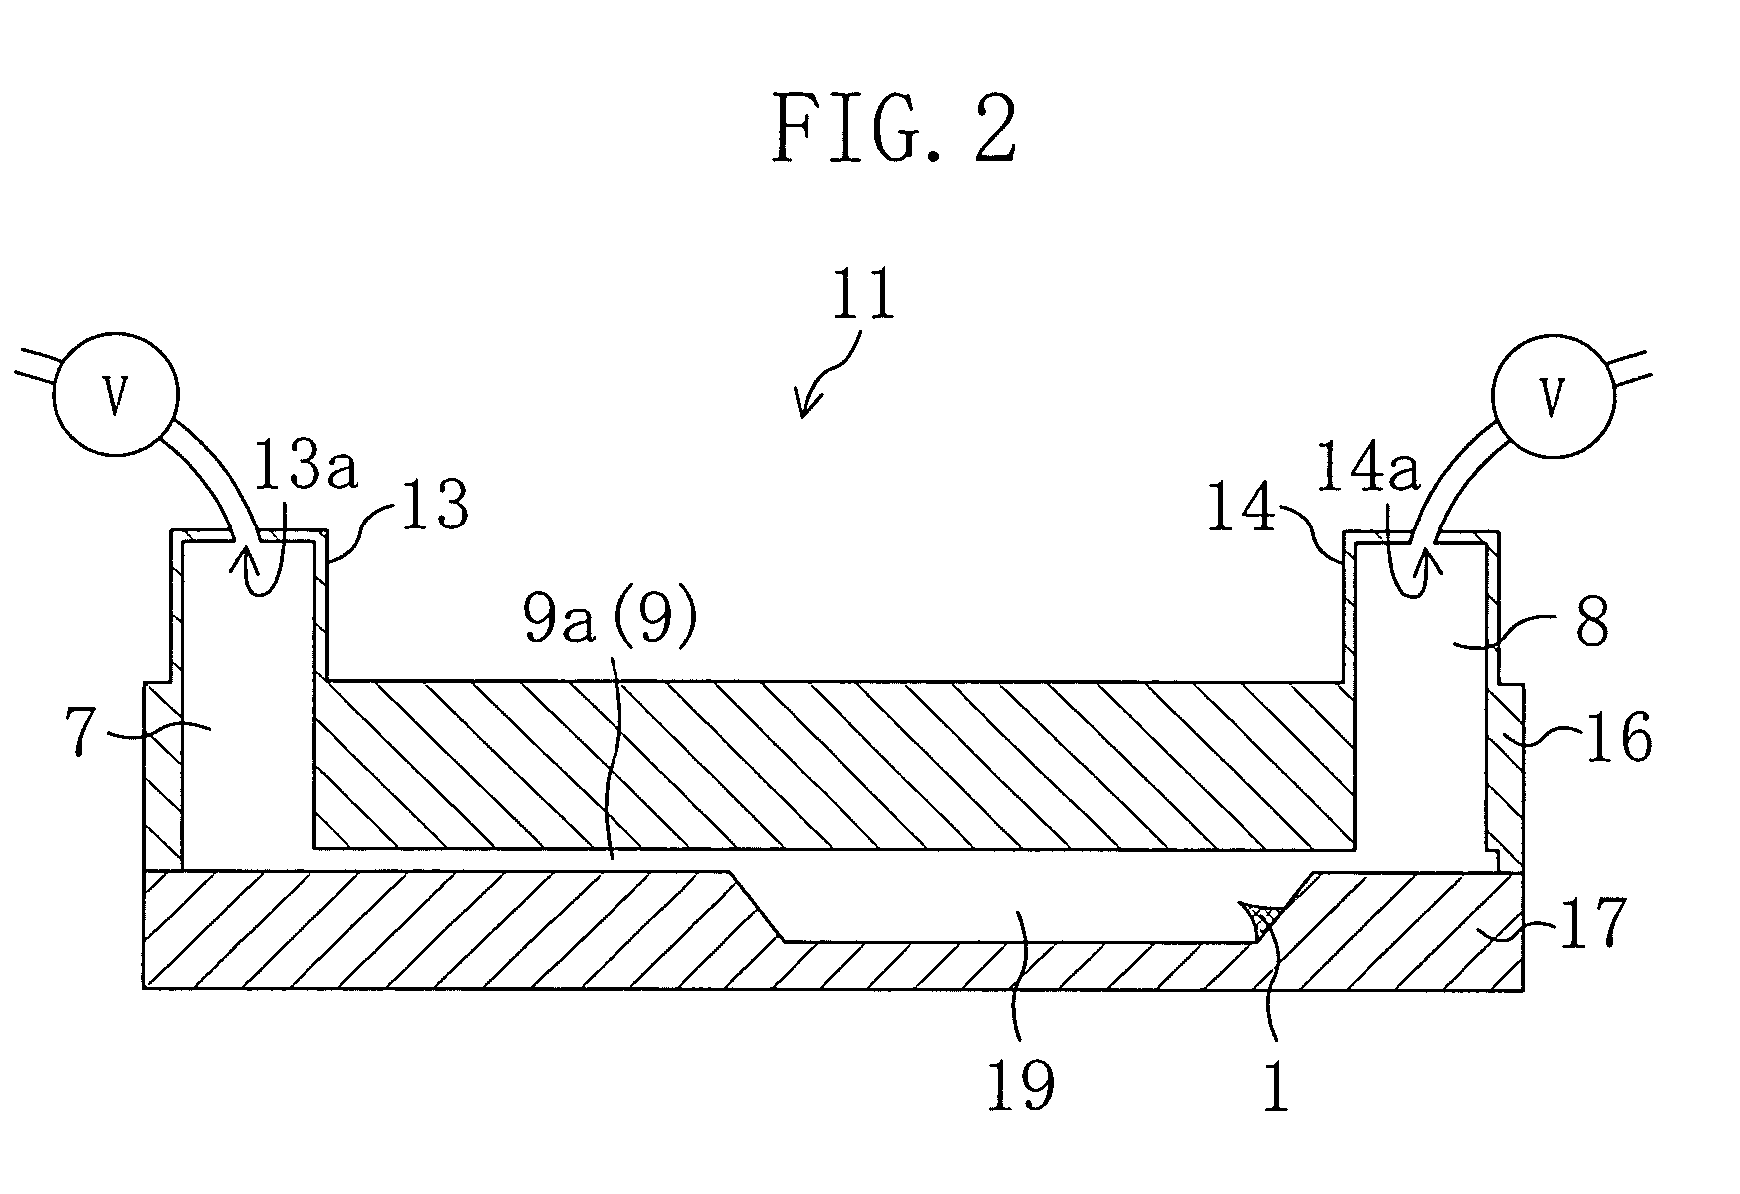 Measurement device for measuring electric signal emitted by biological sample